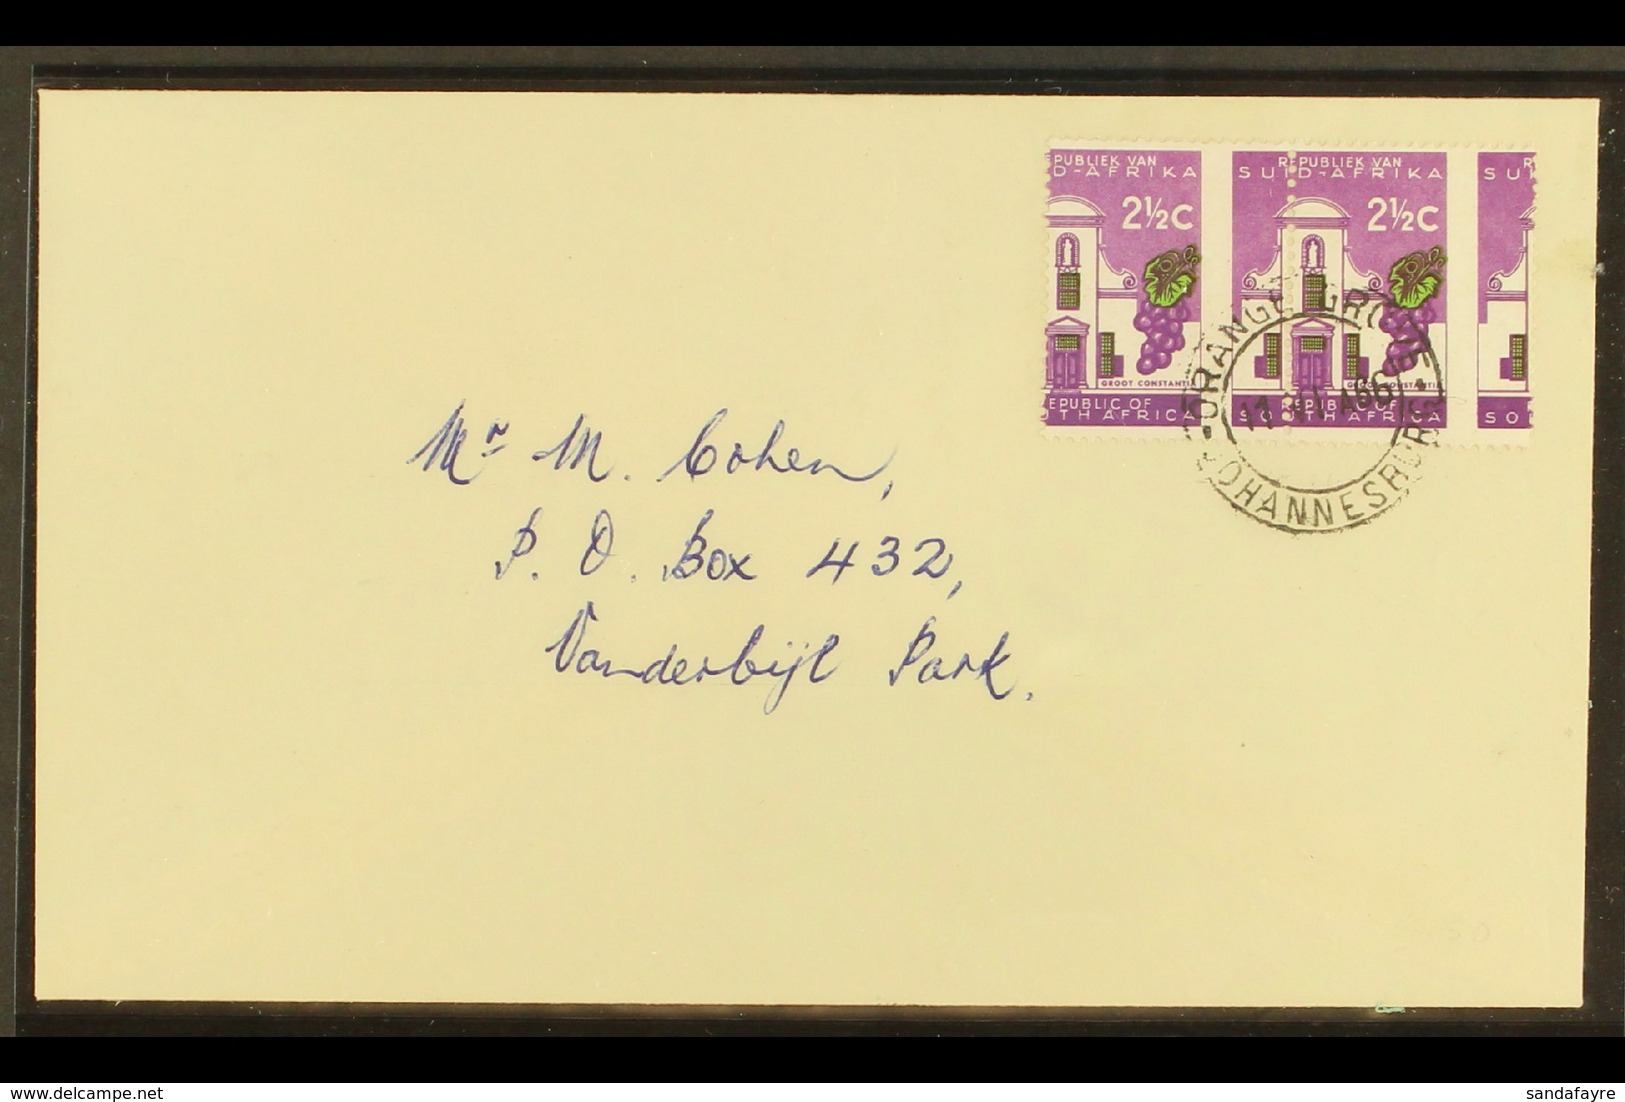 RSA VARIETY 1963-7 2½c Bright Reddish Violet & Emerald, Wmk RSA, GROSSLY MISPERFORATED PAIR On Cover, SG 230a, Neat ORAN - Unclassified